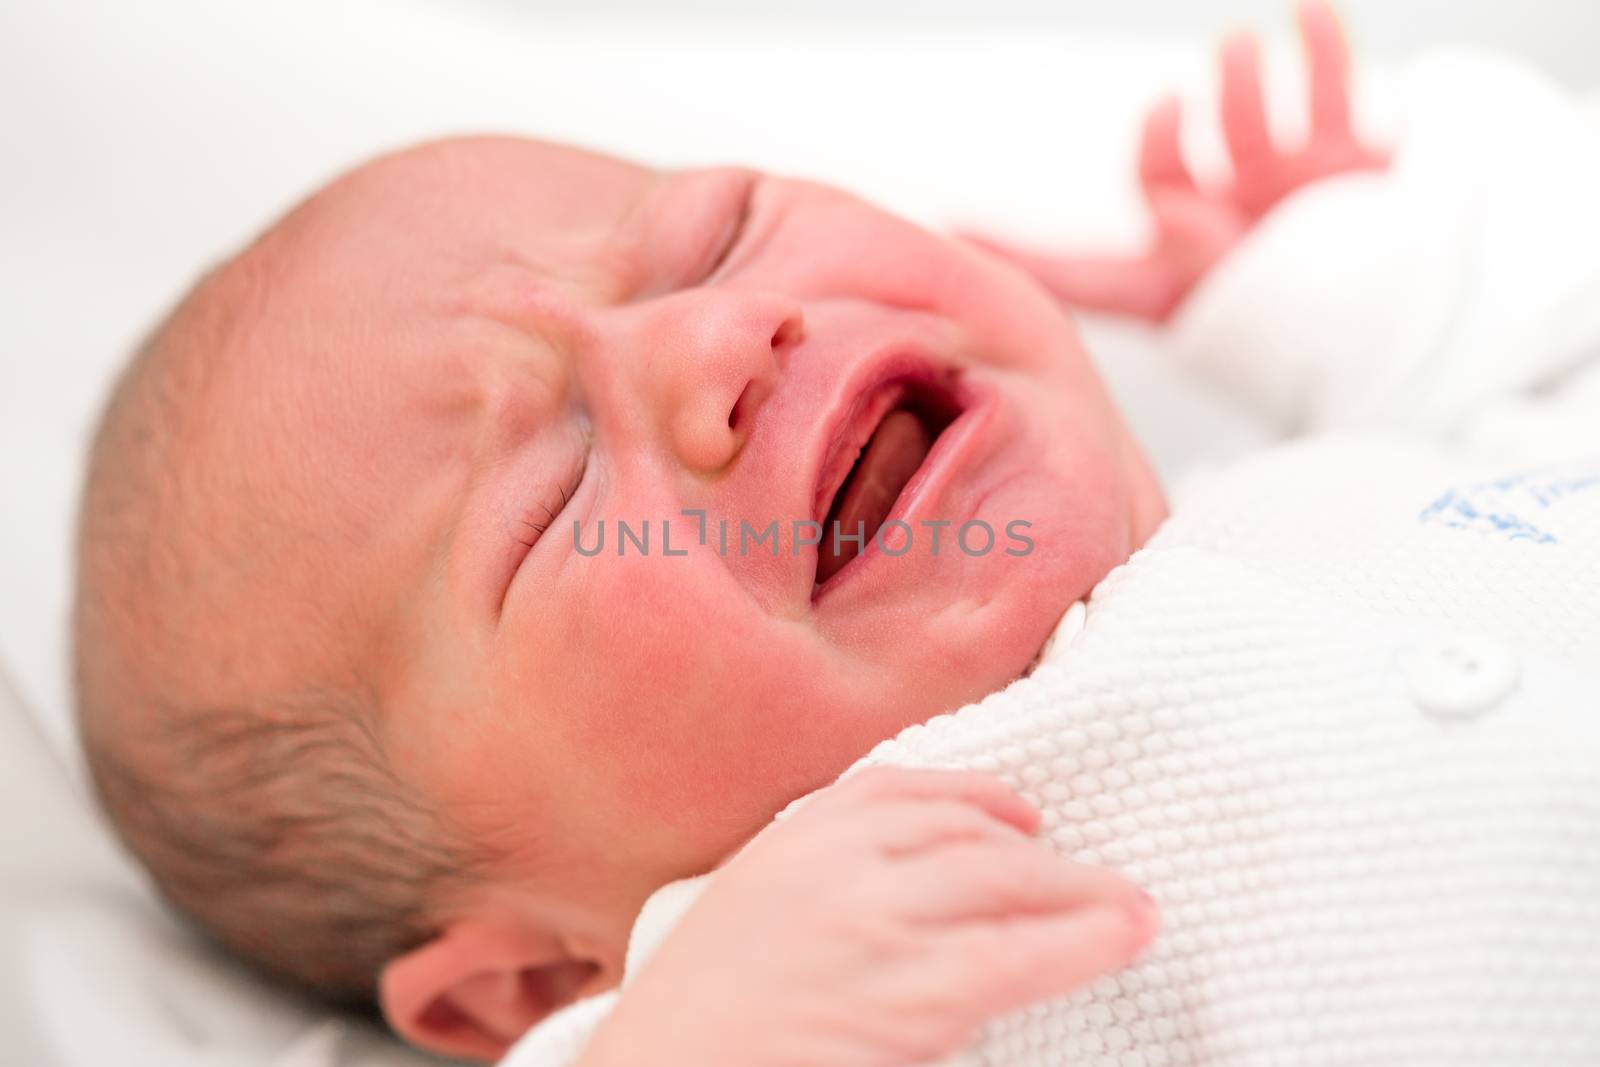 crying newborn baby in the hospital - the first hours of the new life